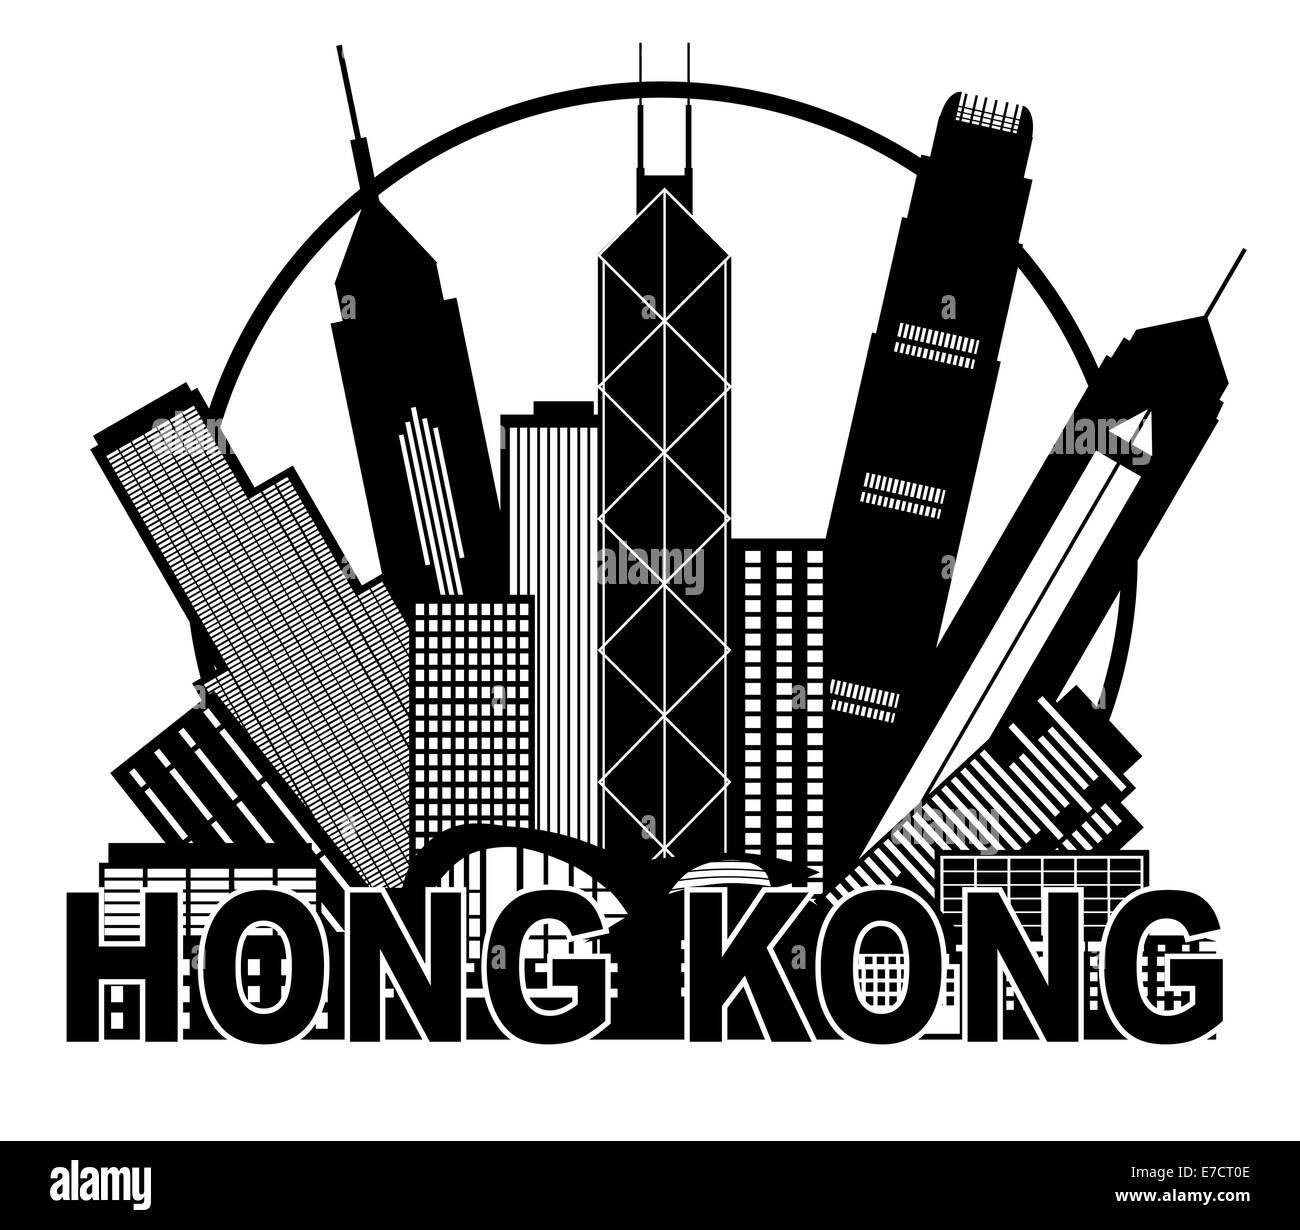 Hong Kong City Skyline in Circle Black Outline Isolated on White Background Illustration Stock Photo